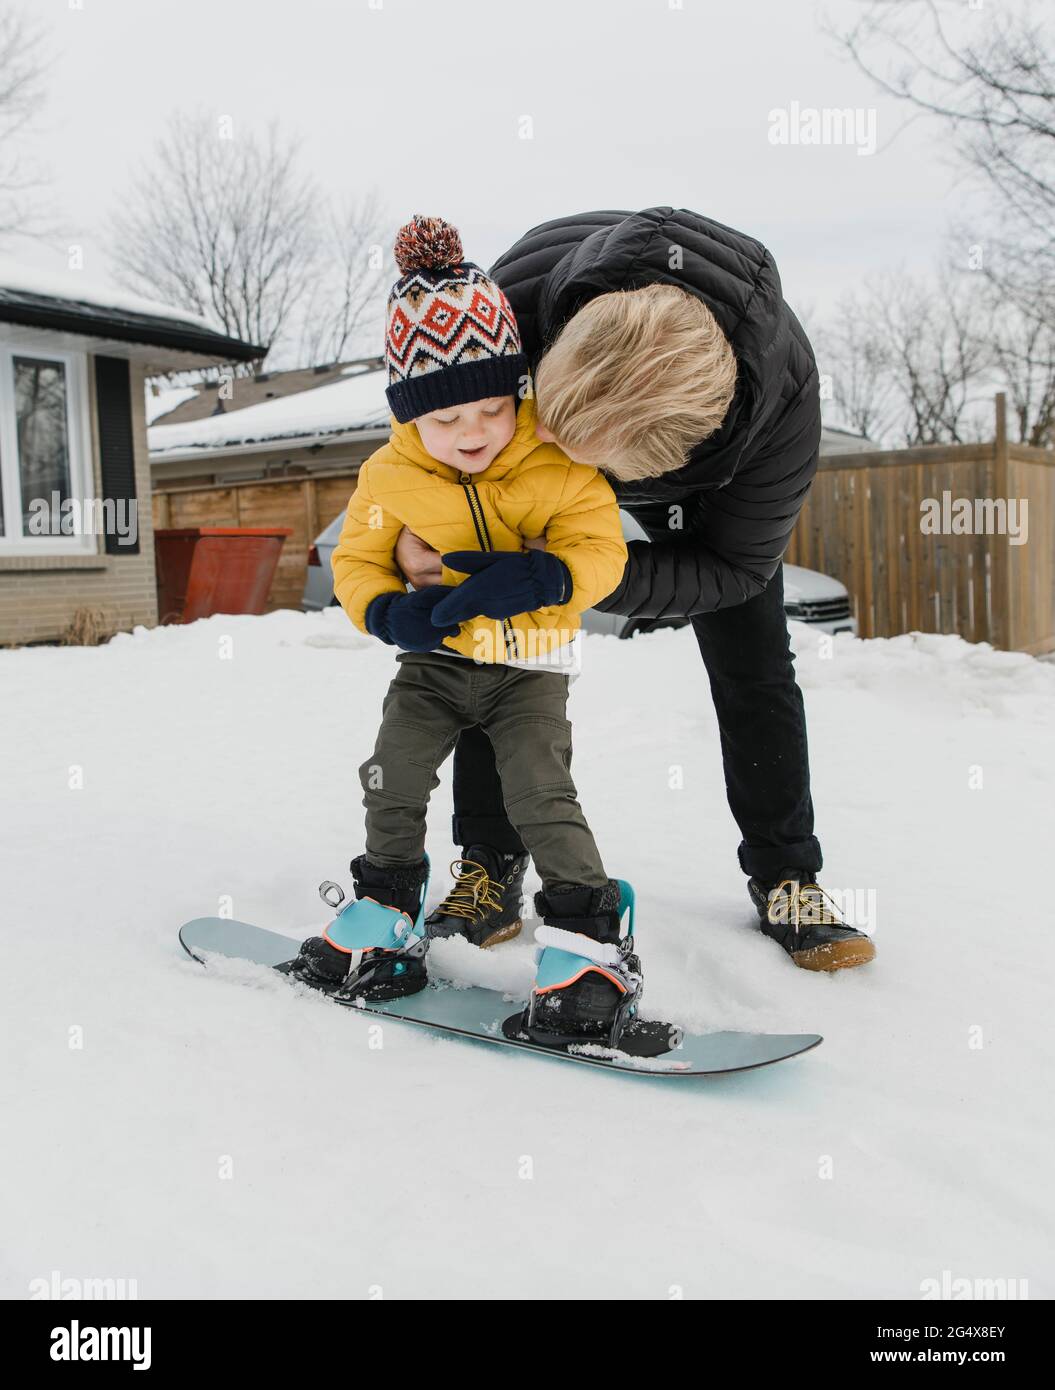 Loving father embracing son learning snowboarding during winter Stock Photo